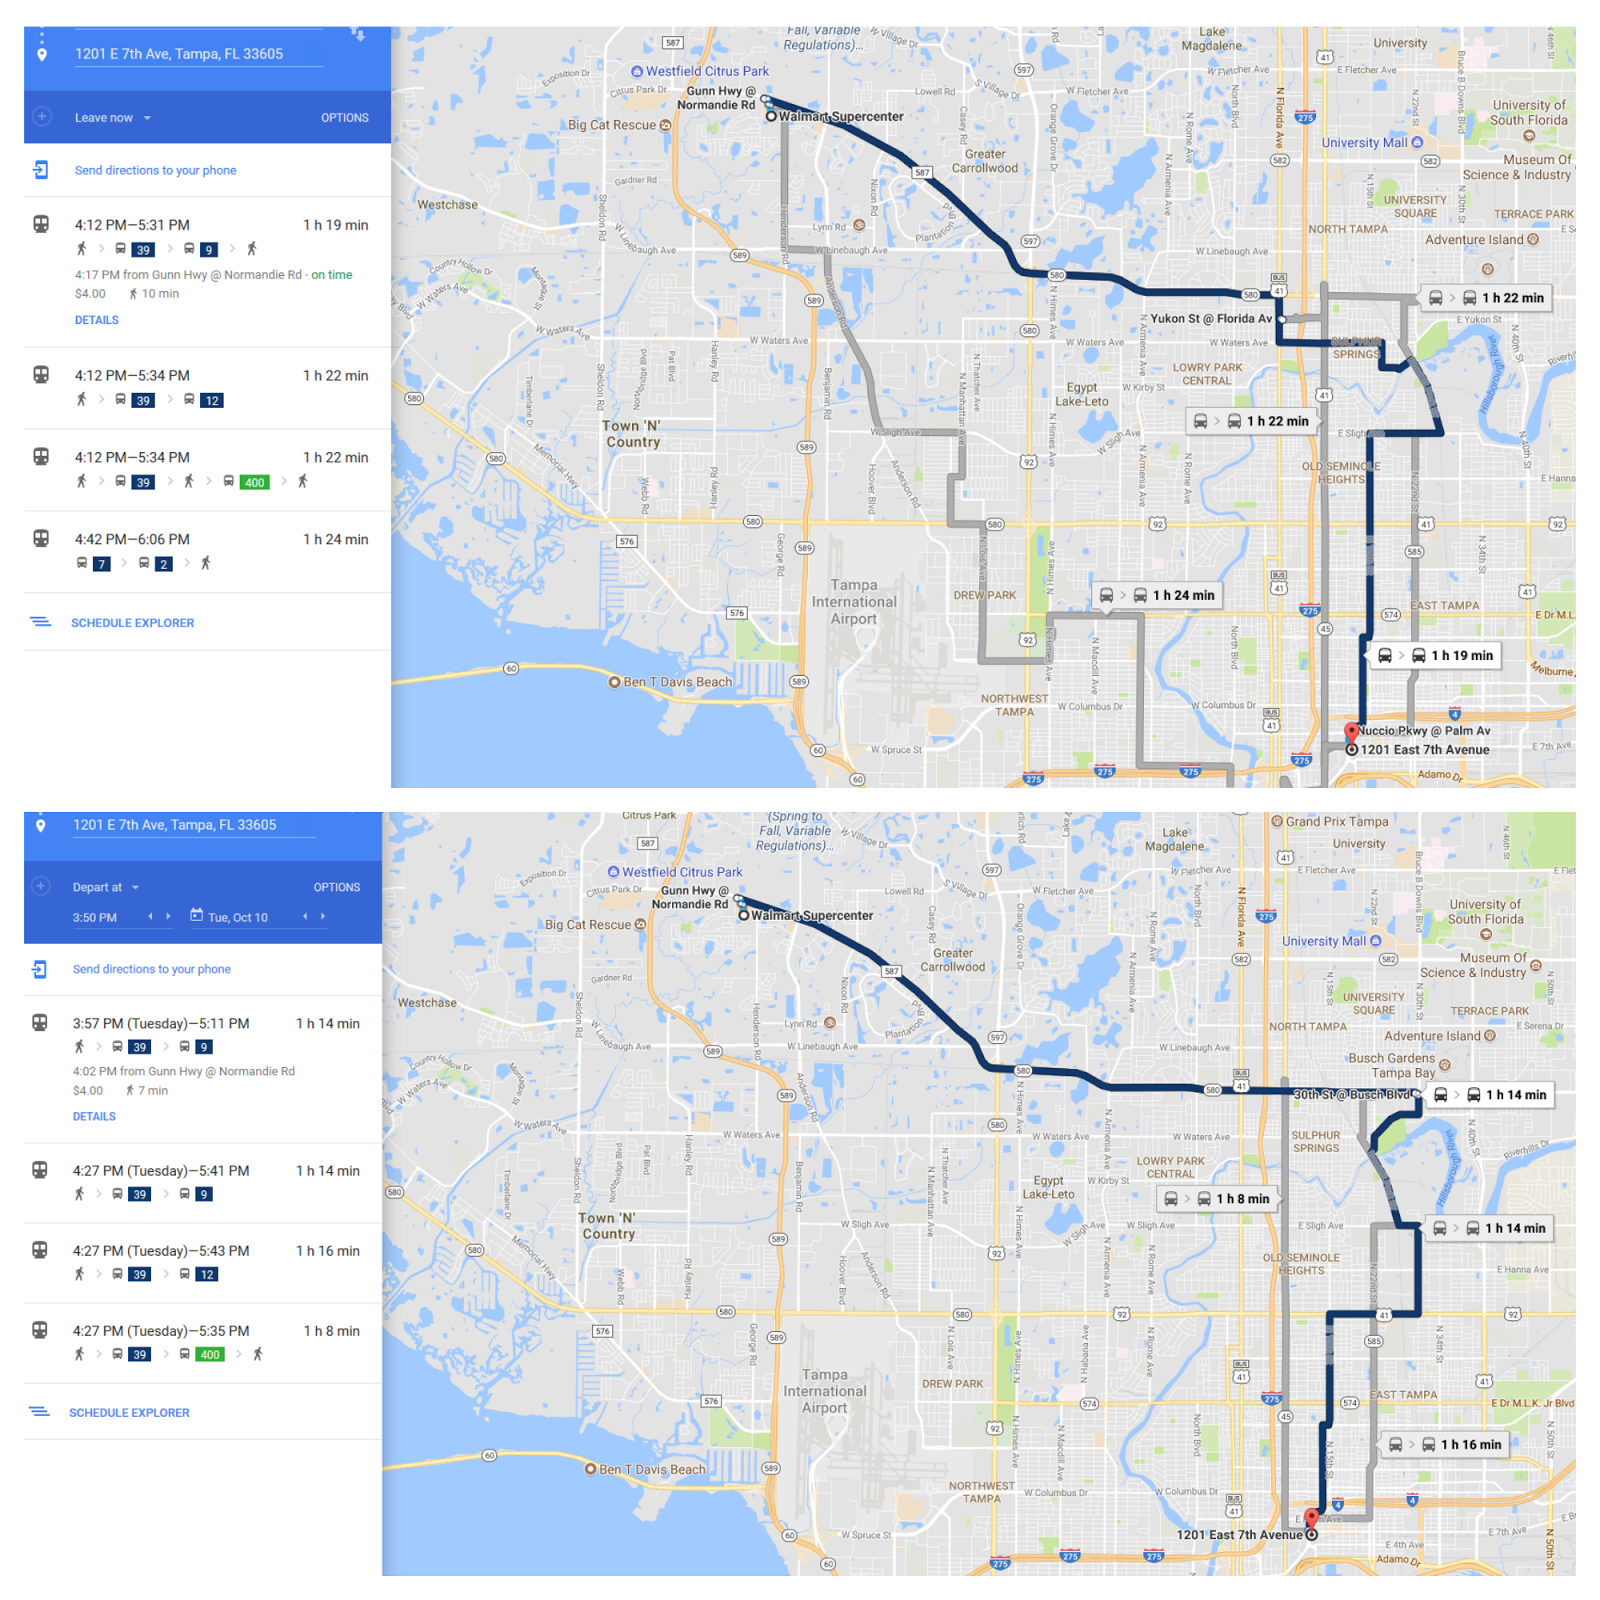 In Transit - The Official Hart Transit Blog: Plan Your Mission Max - Google Maps Tampa Florida